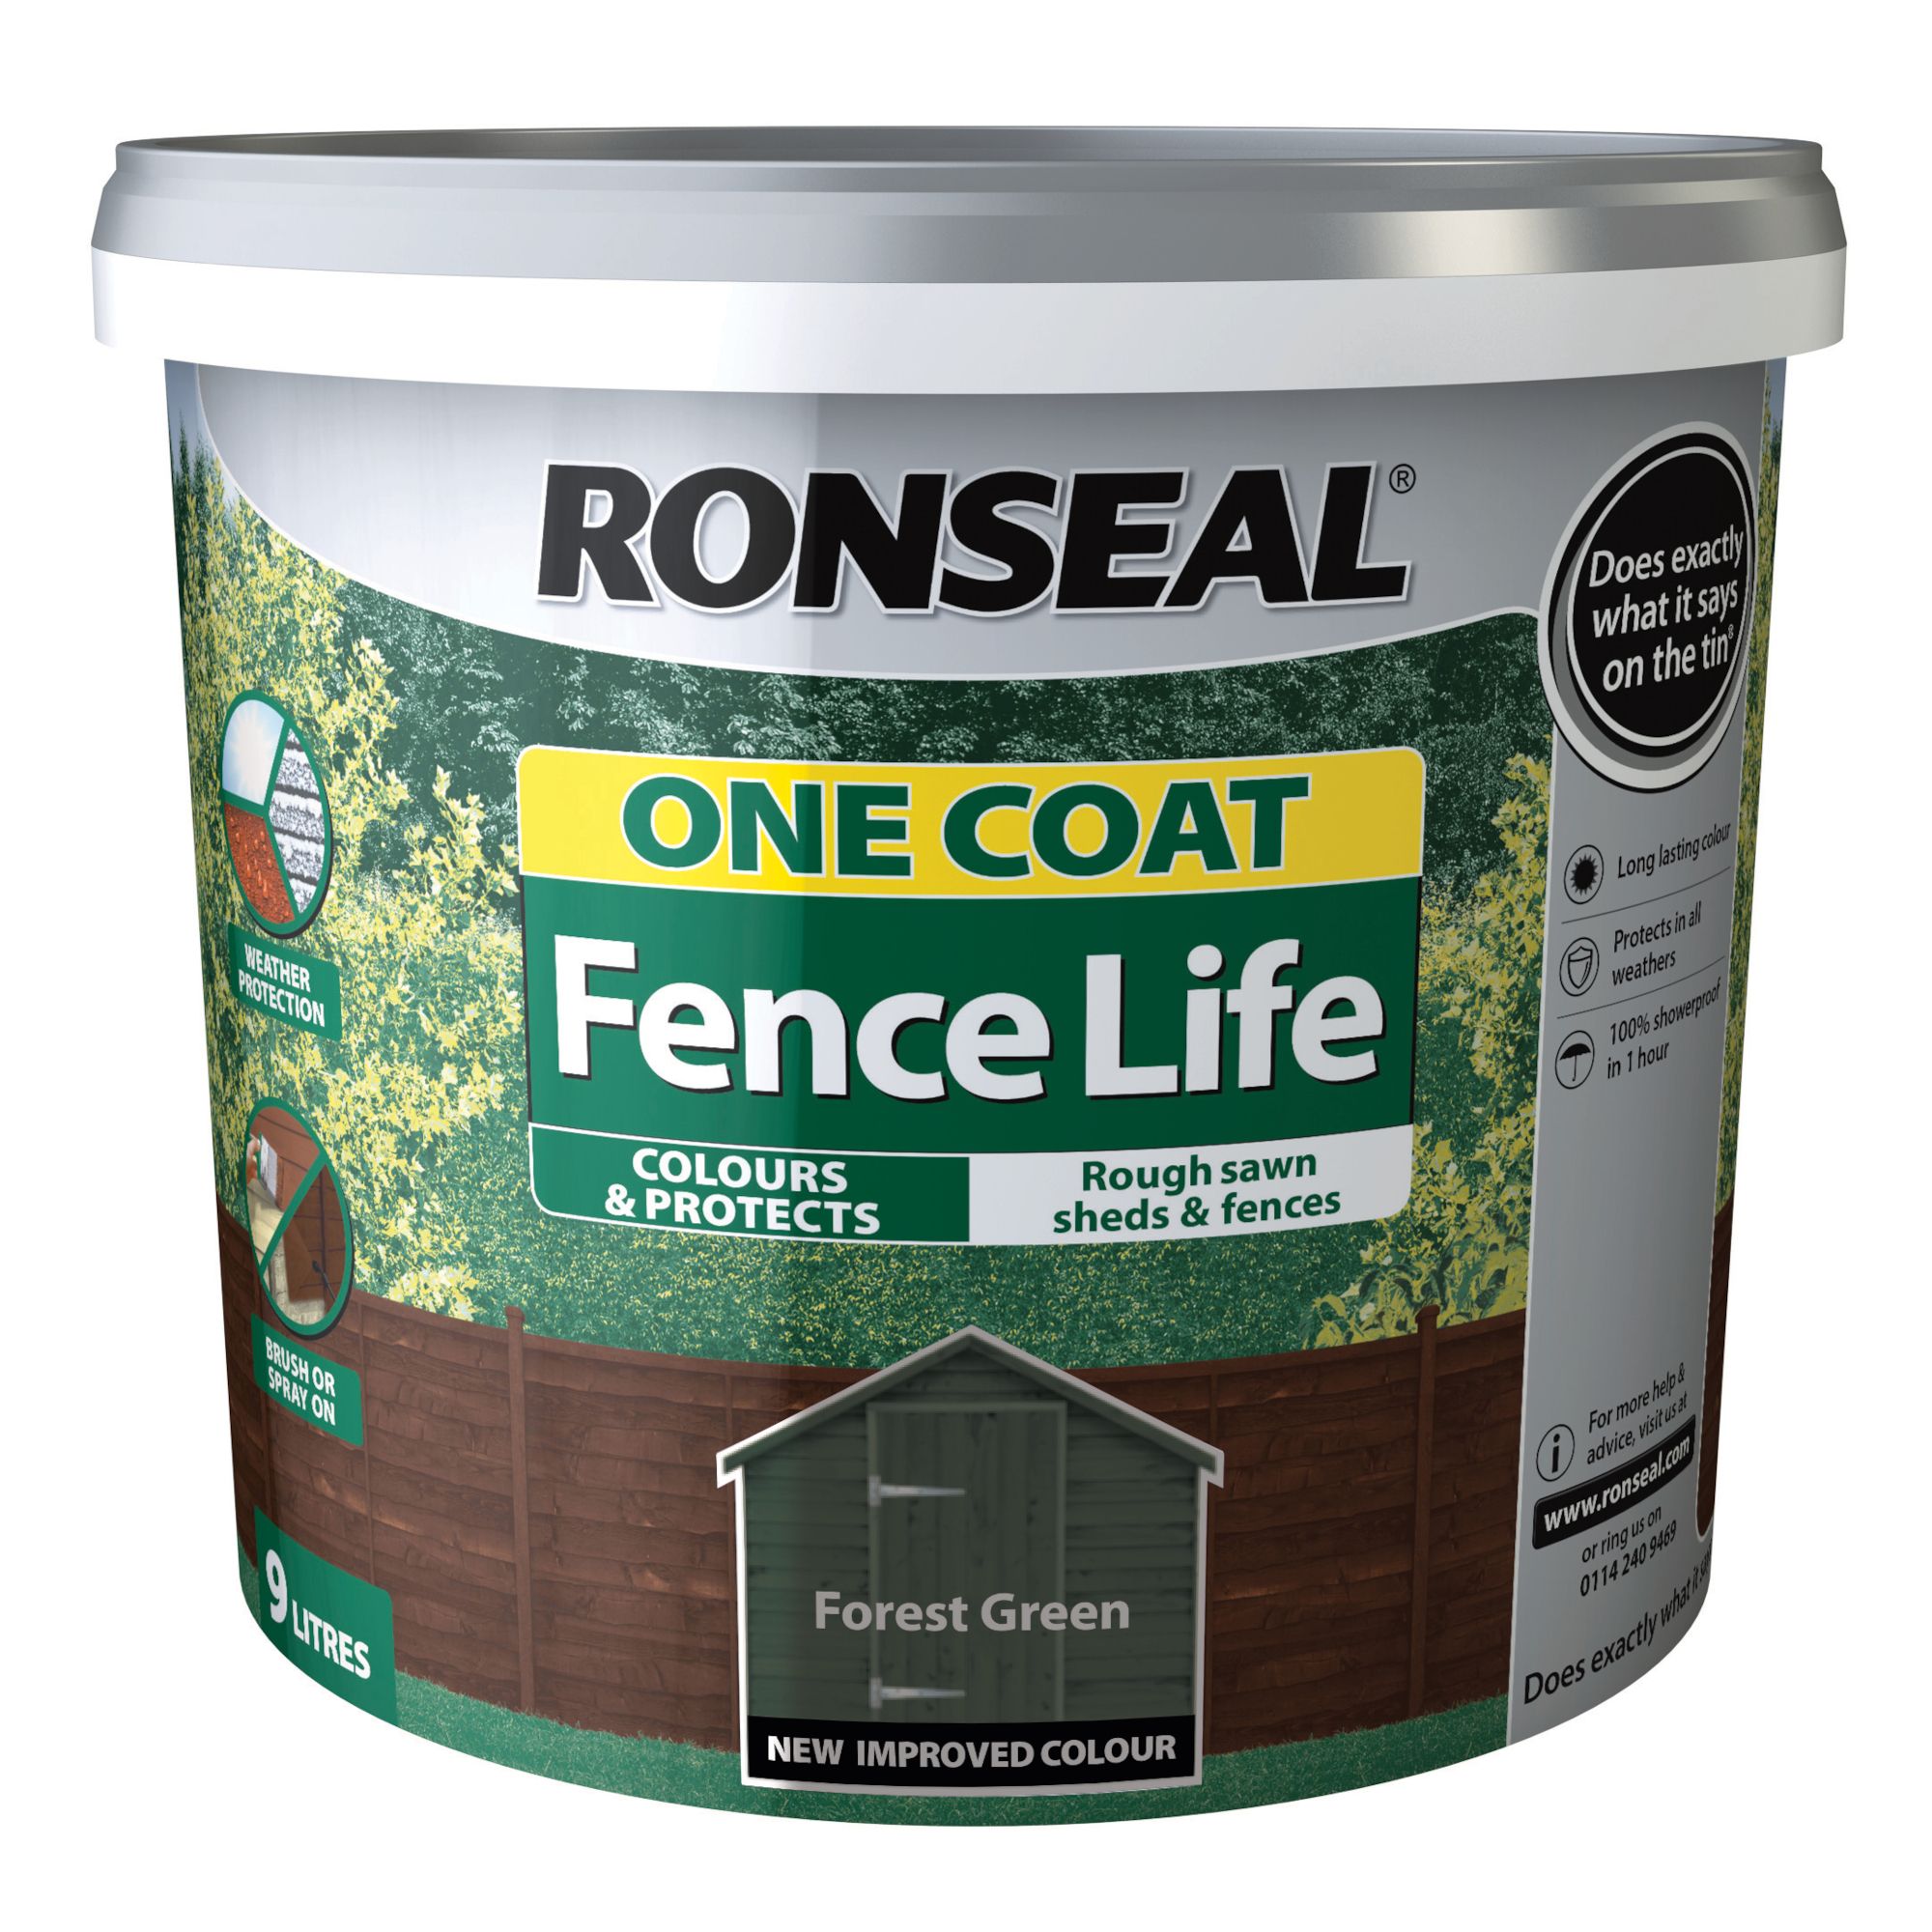 Ronseal One Coat Fence Life Forest green Matt Exterior Wood paint, 9L